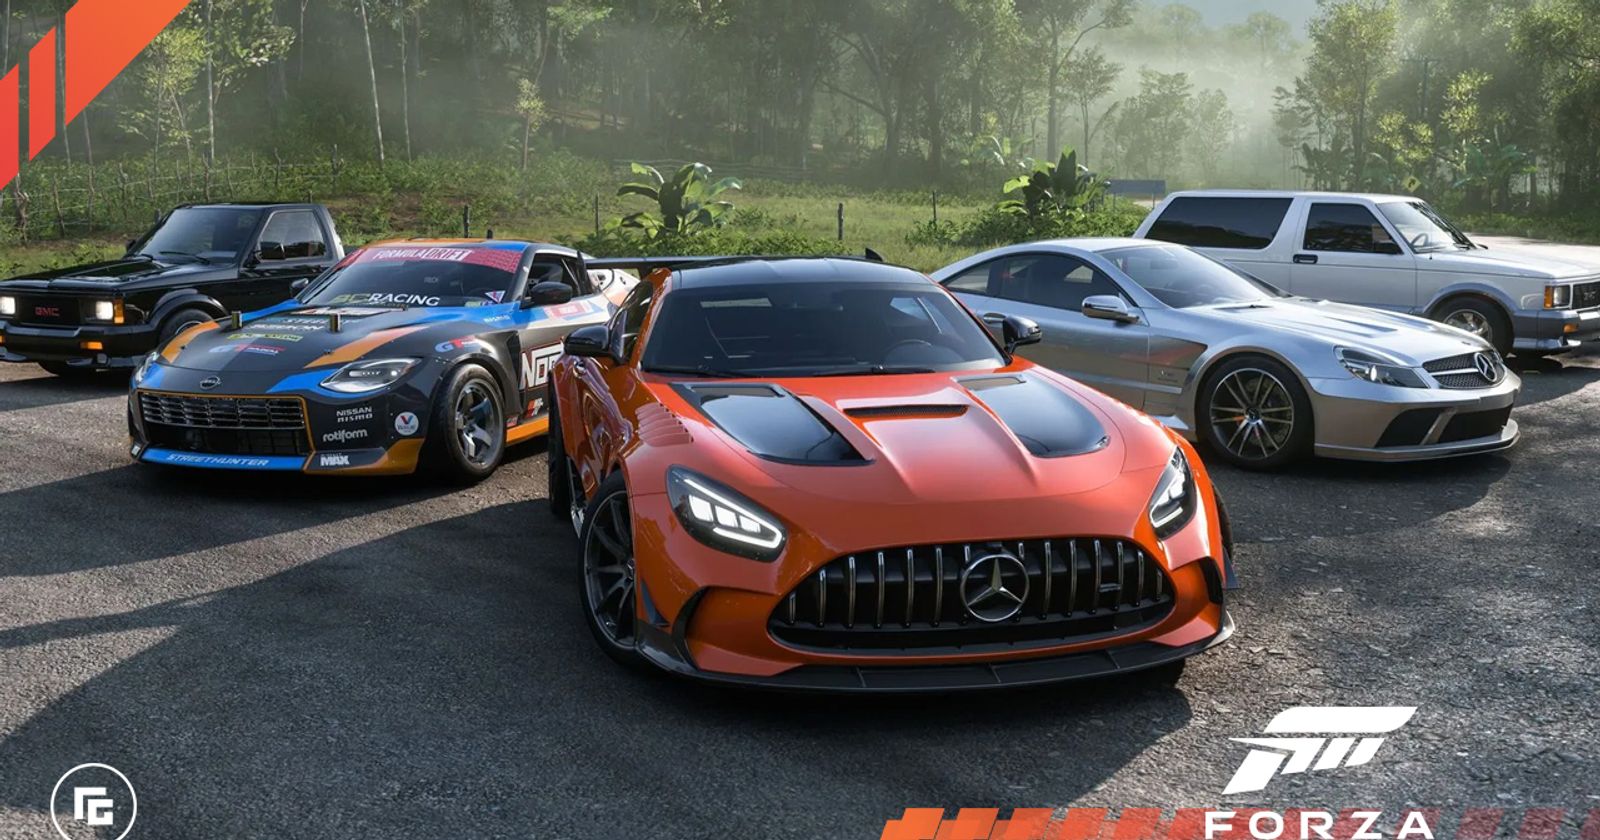 Forza Horizon 5 High Performance Update released, full patch notes